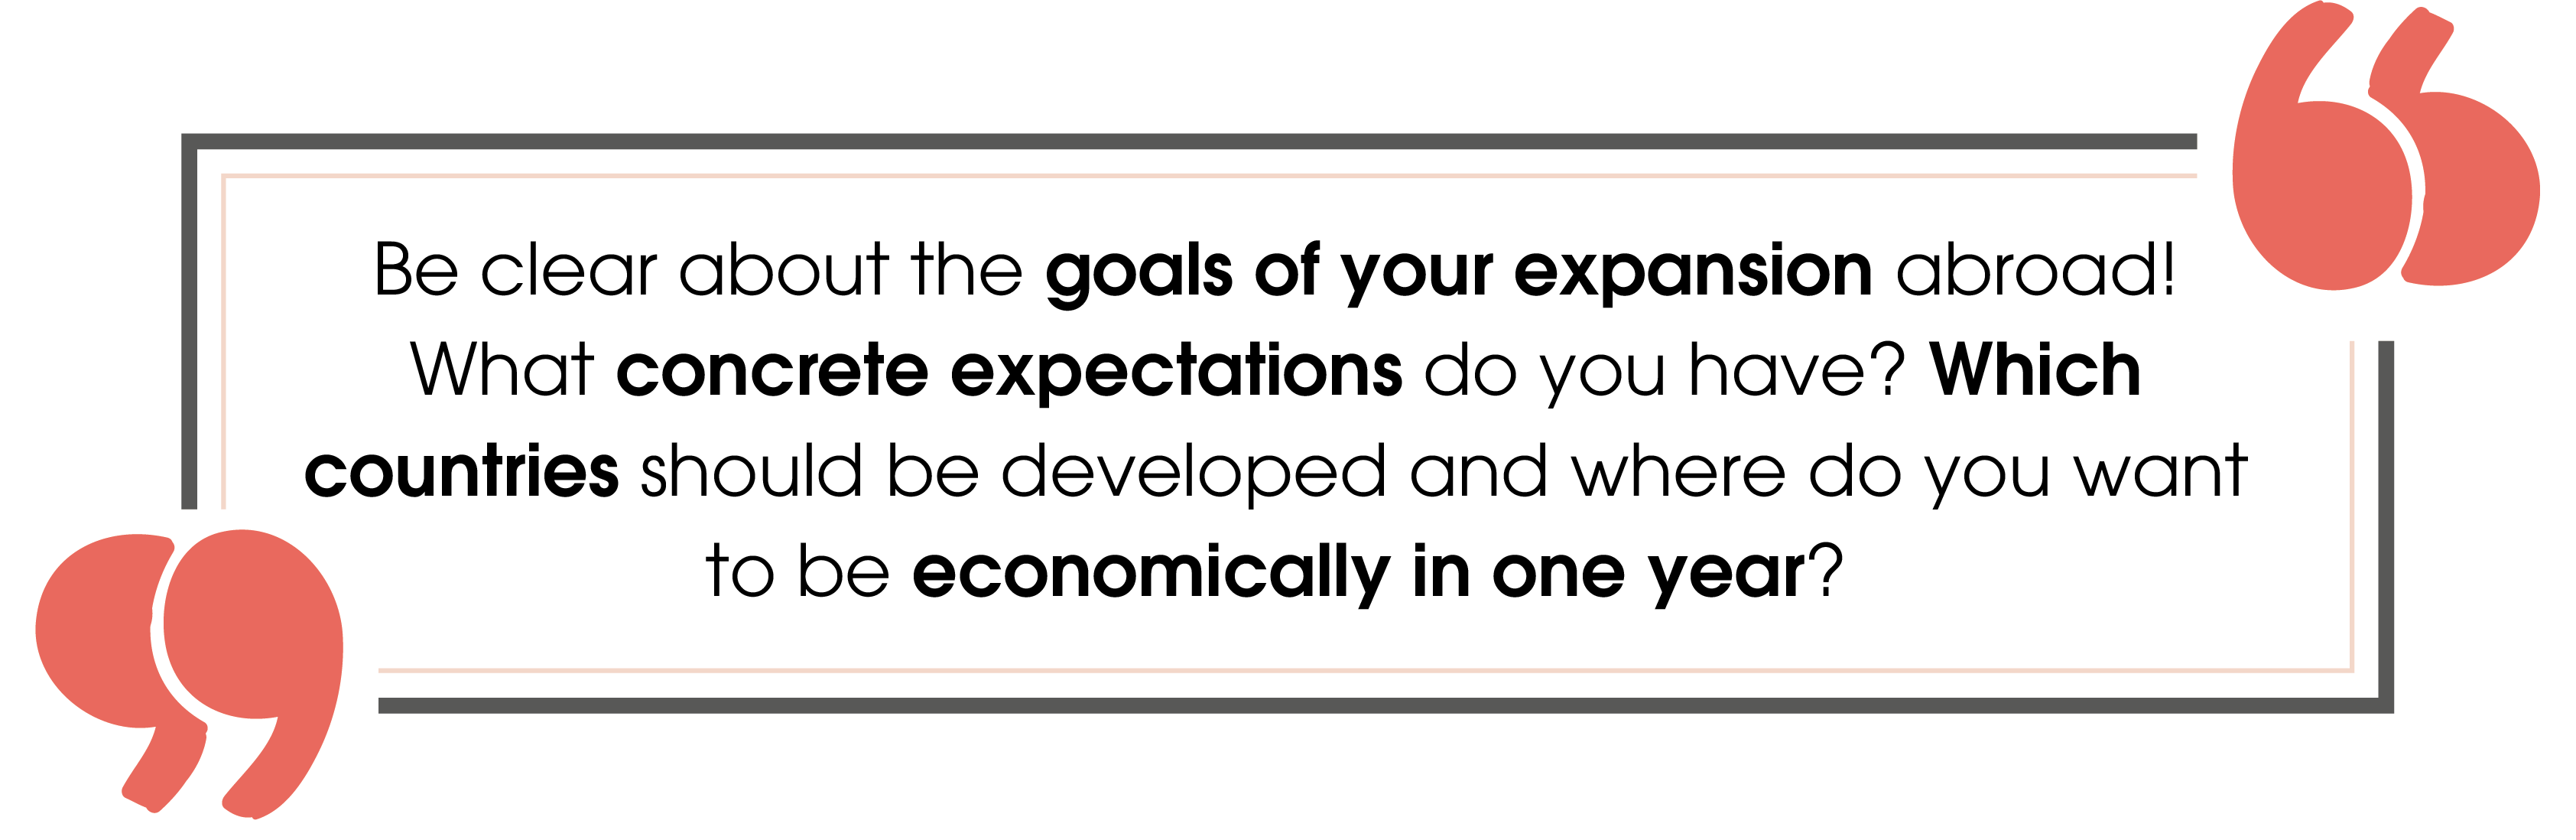 Quote: "Make the goals of your expansion abroad clear to yourself! What concrete ideas do you have? Which countries should be opened up and where do you want to be economically in one year?"